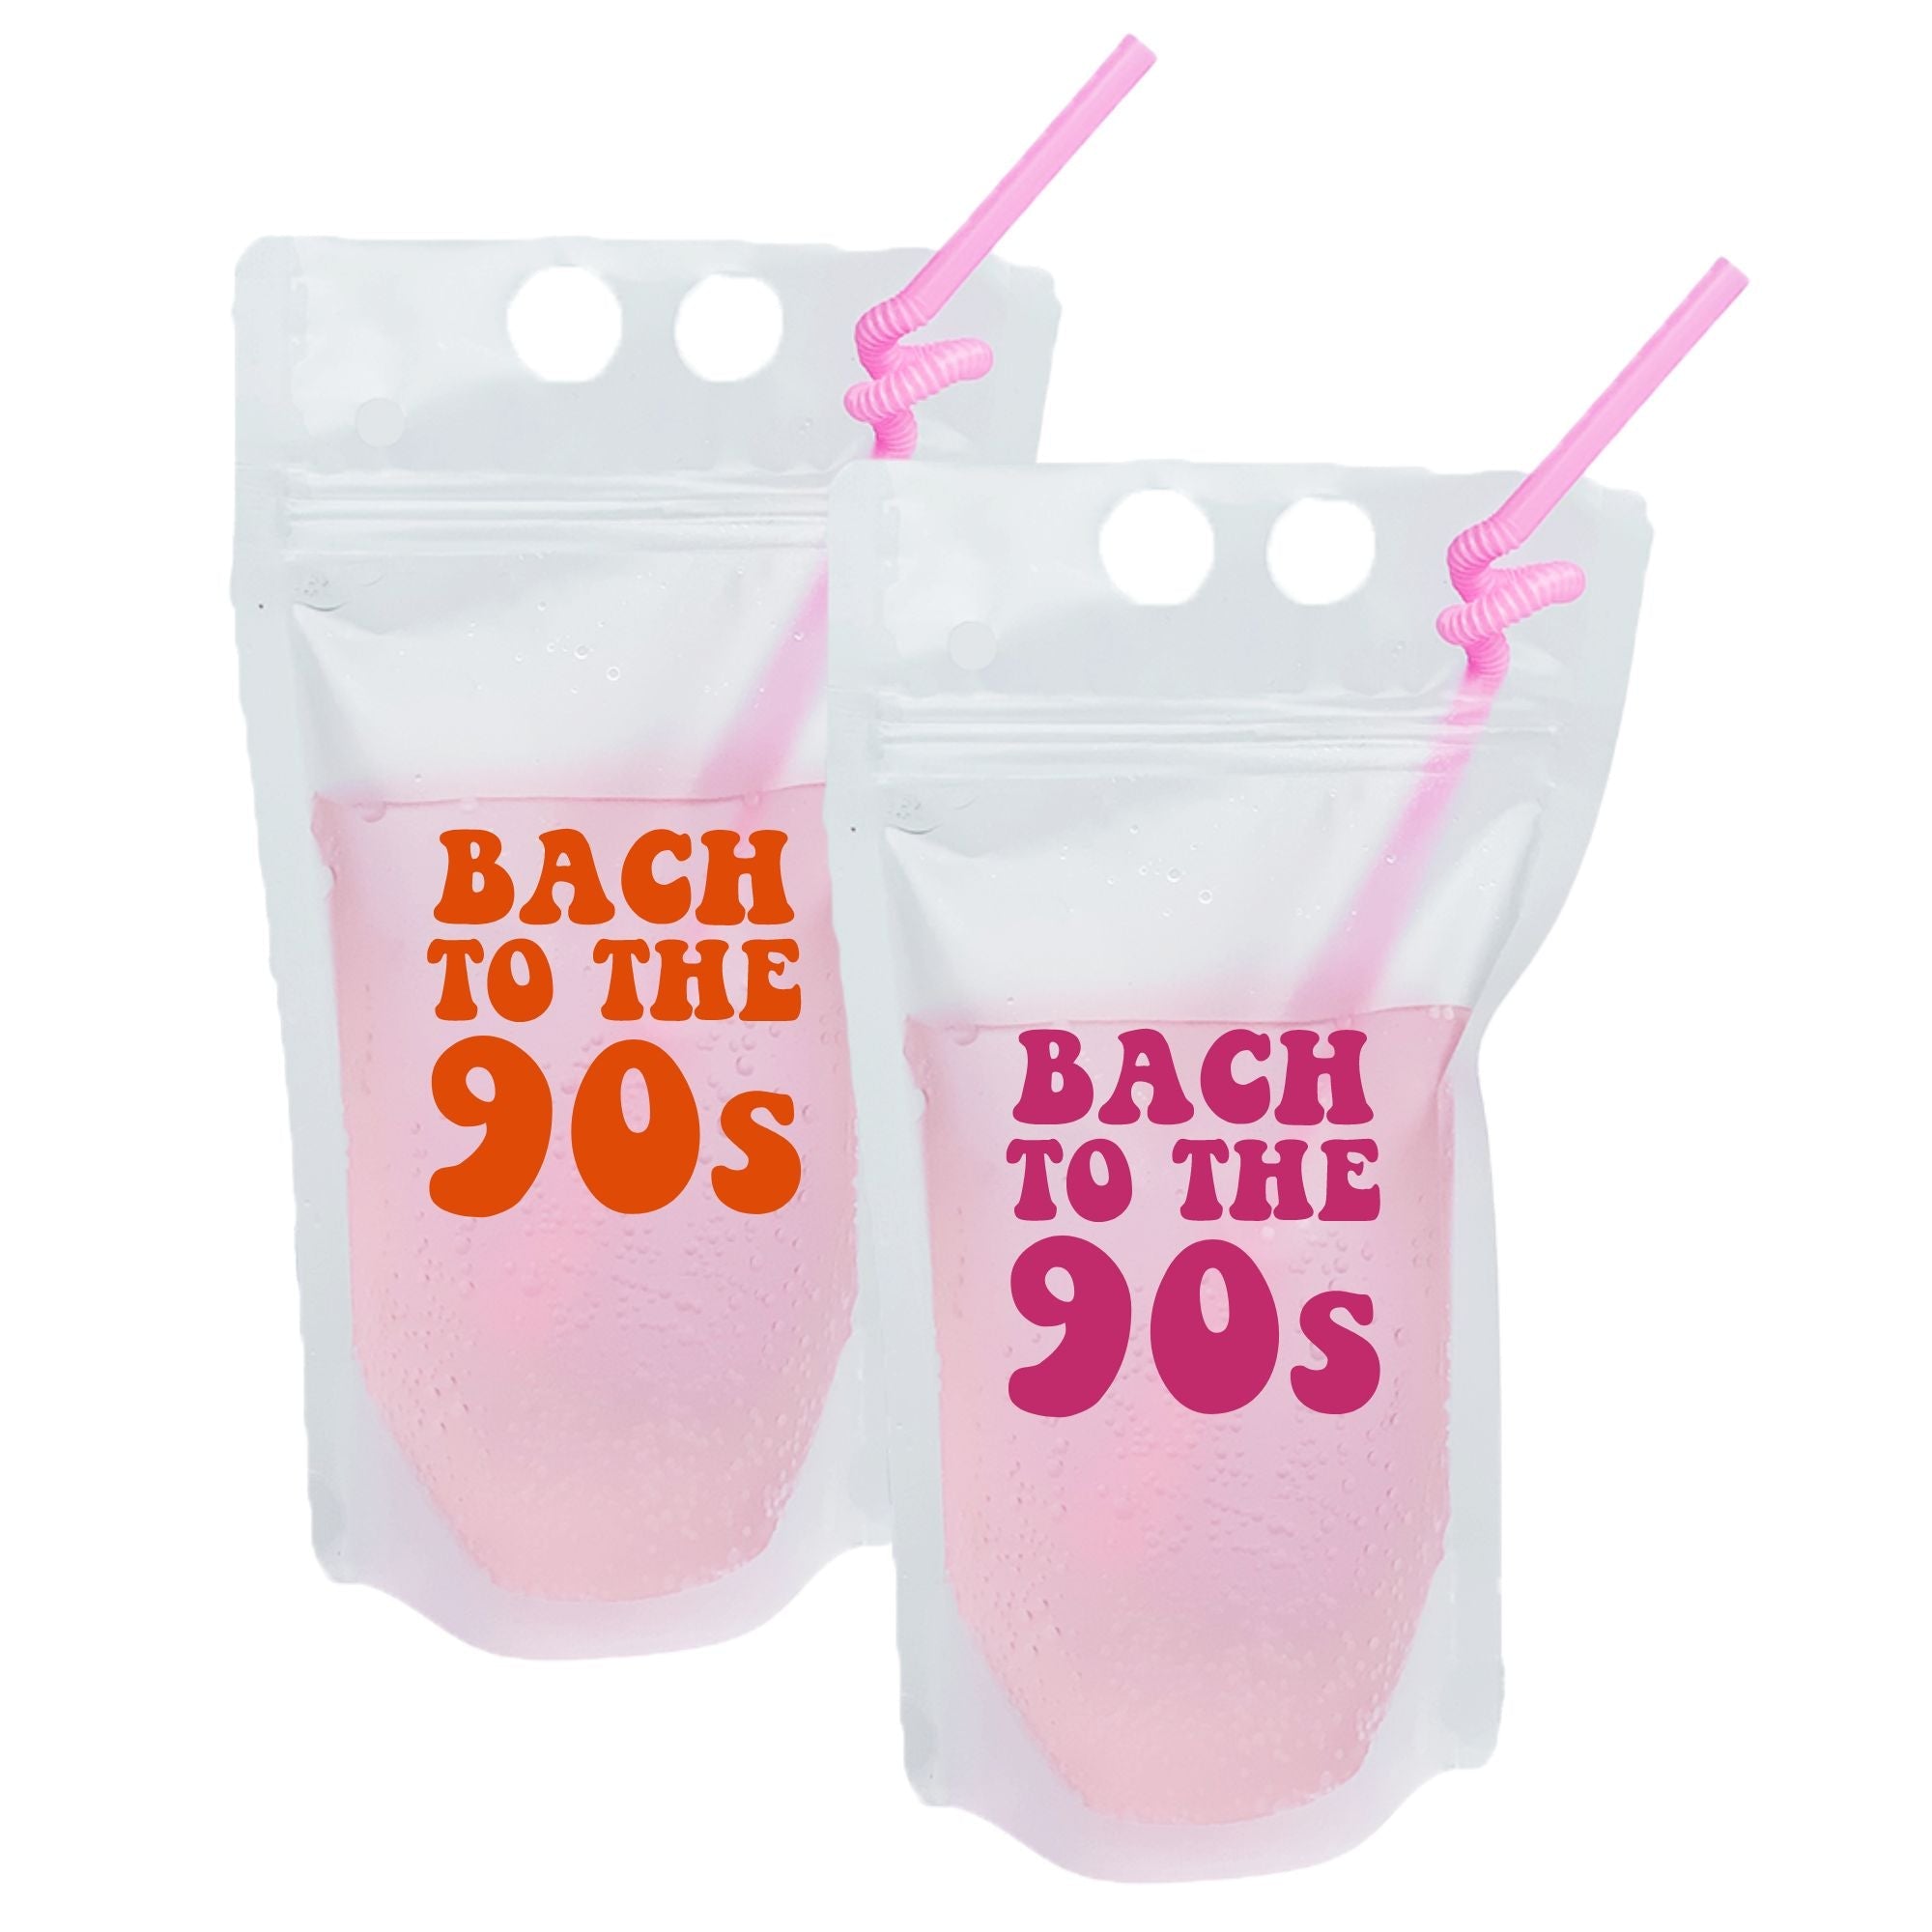 https://cdn.shopify.com/s/files/1/0128/5534/5209/products/bach-to-the-90s-party-pouch-430248_2000x.jpg?v=1692393742